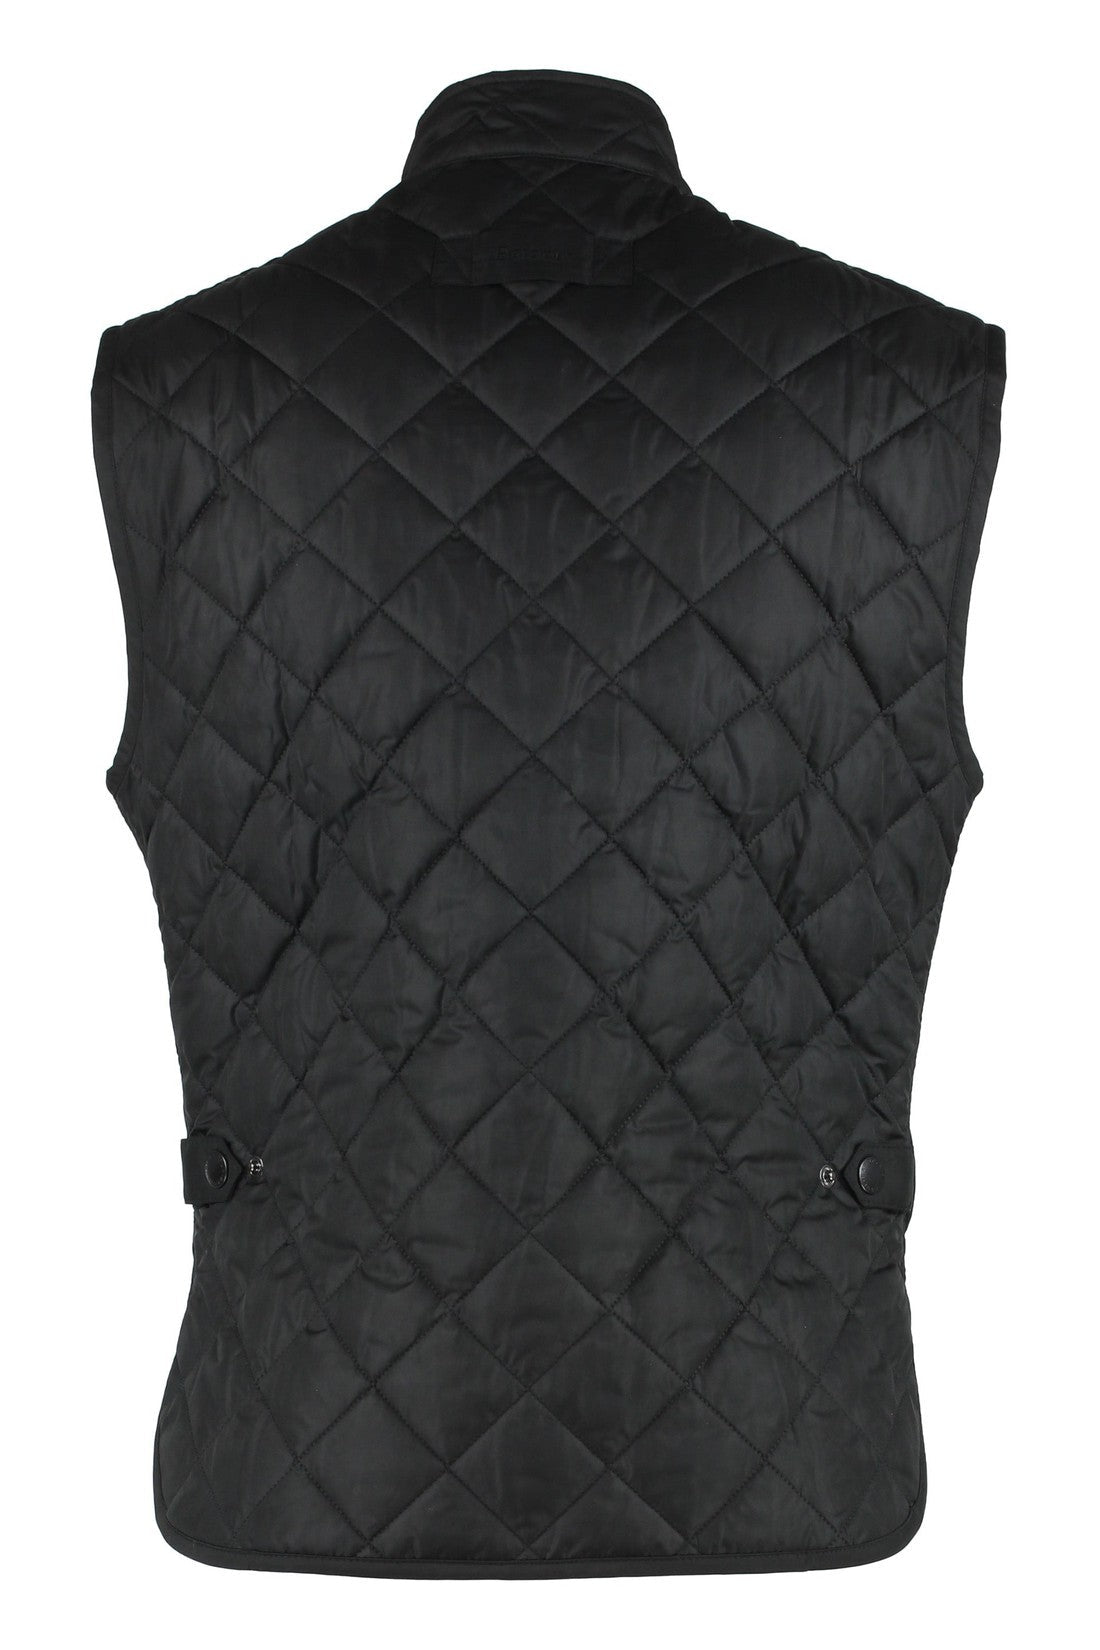 Barbour-OUTLET-SALE-Quilted Sleeveless-ARCHIVIST